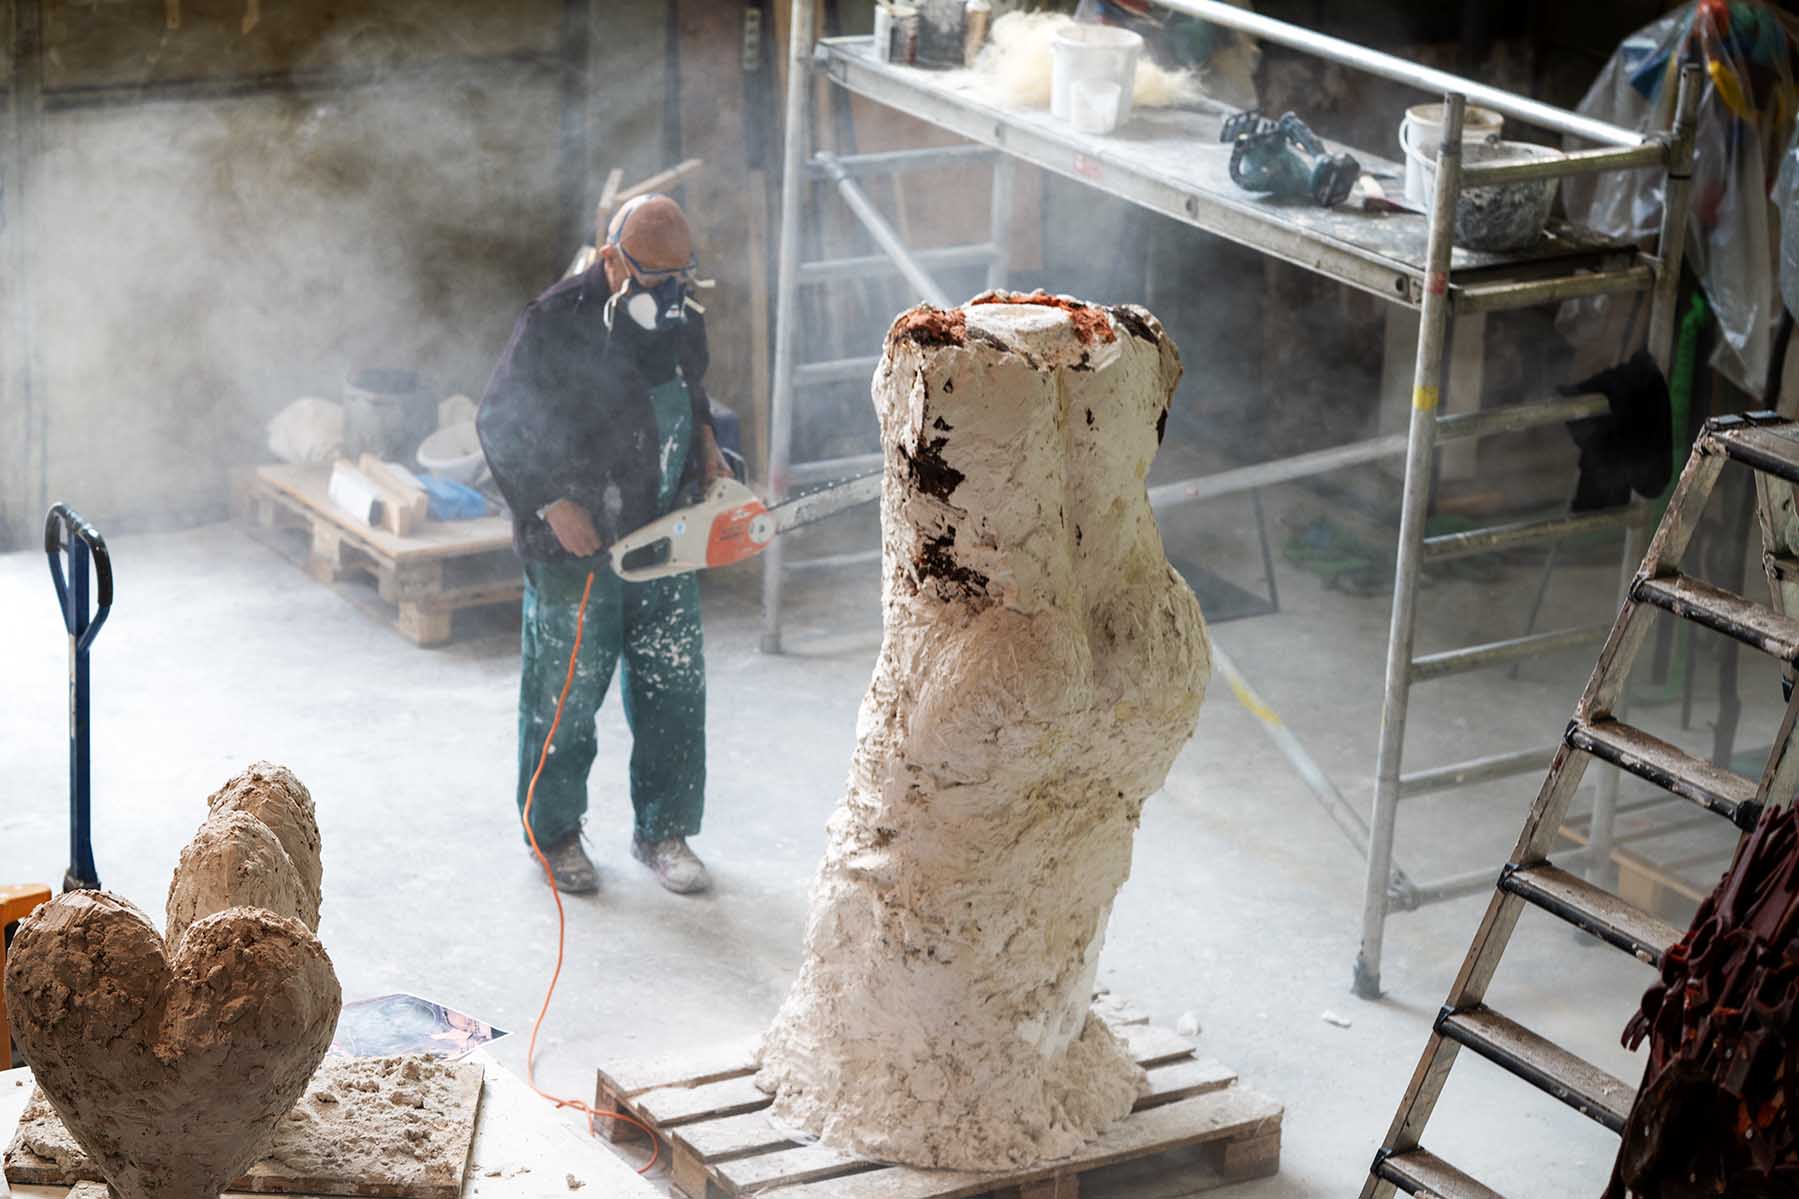 Jim Dine holds a chainsaw and works on a sculpture in his dusty Paris studio